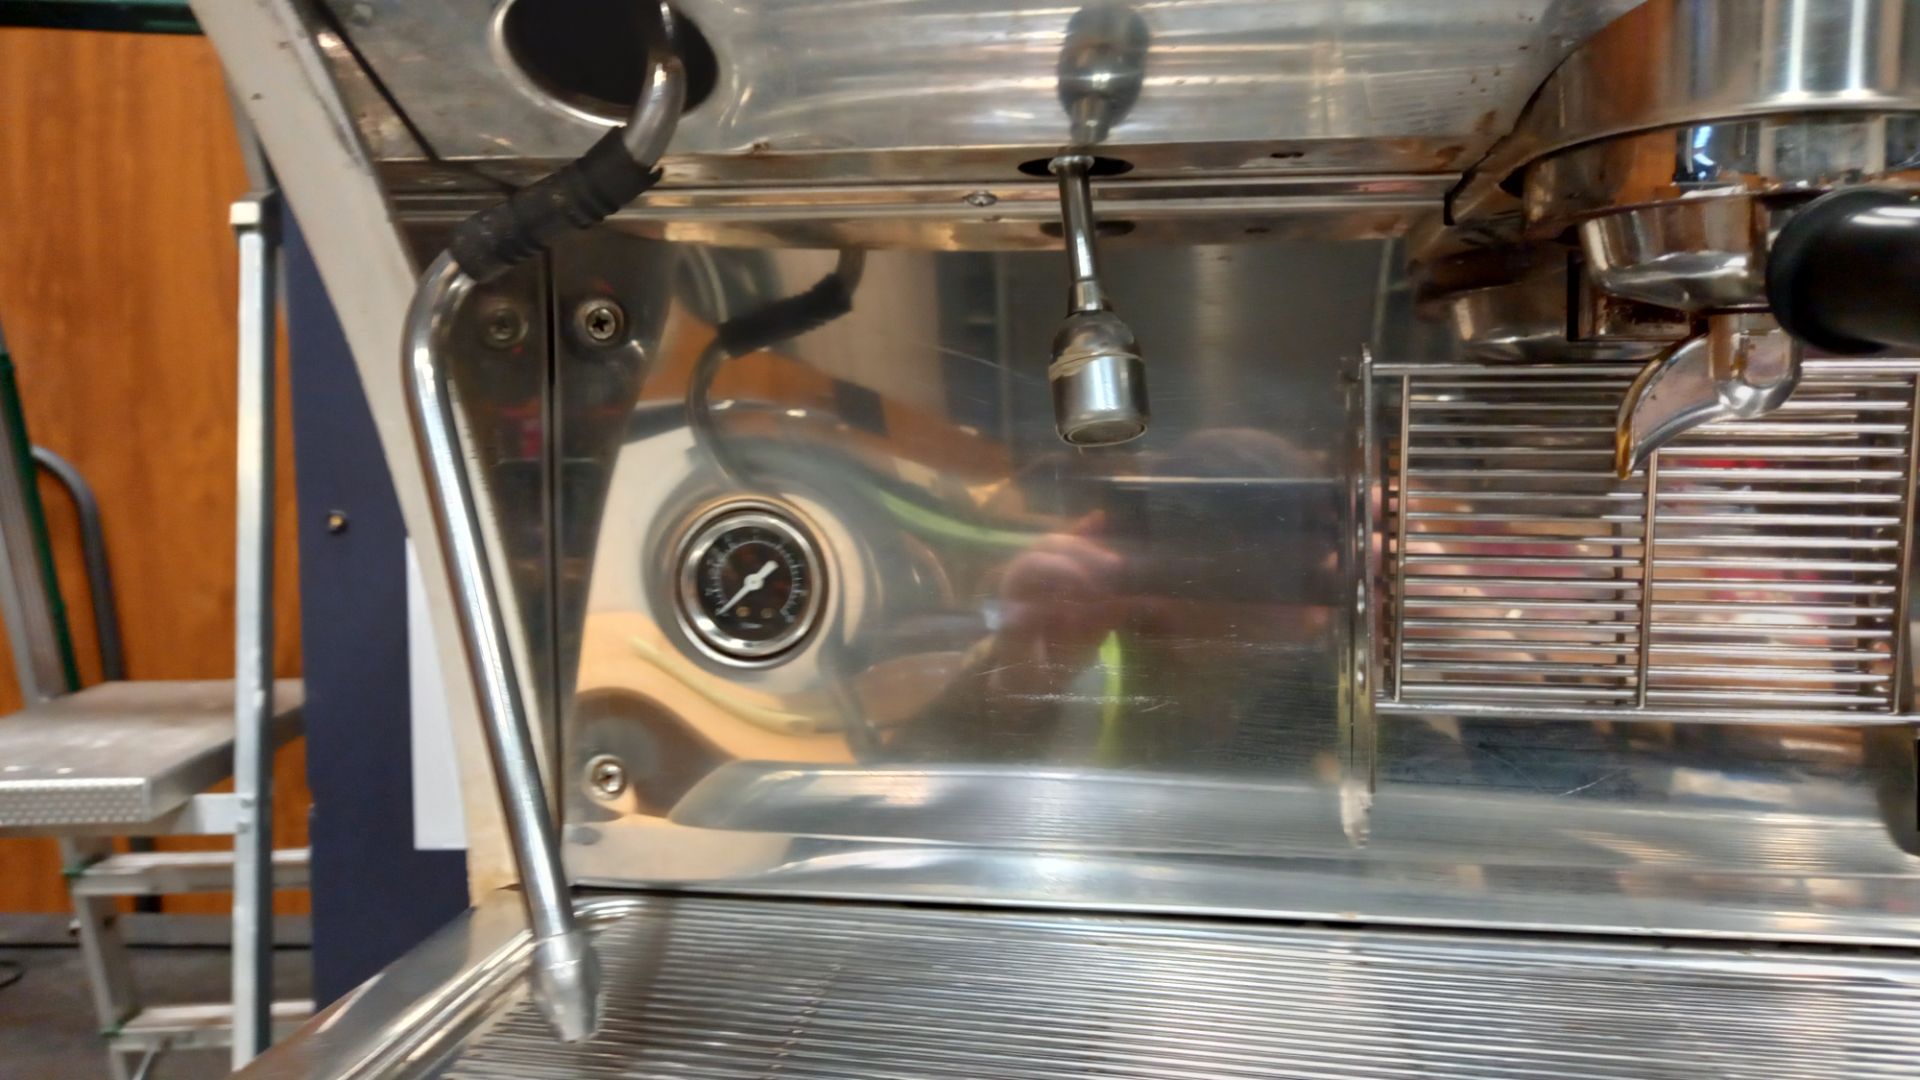 DIAMANT EXPOBAR 3 GROUP PROFESSIONAL COFFEE MACHINE - NO VISIBLE PLATE- 80KG (WITH 4 TRAYS OF COFFEE - Image 4 of 4